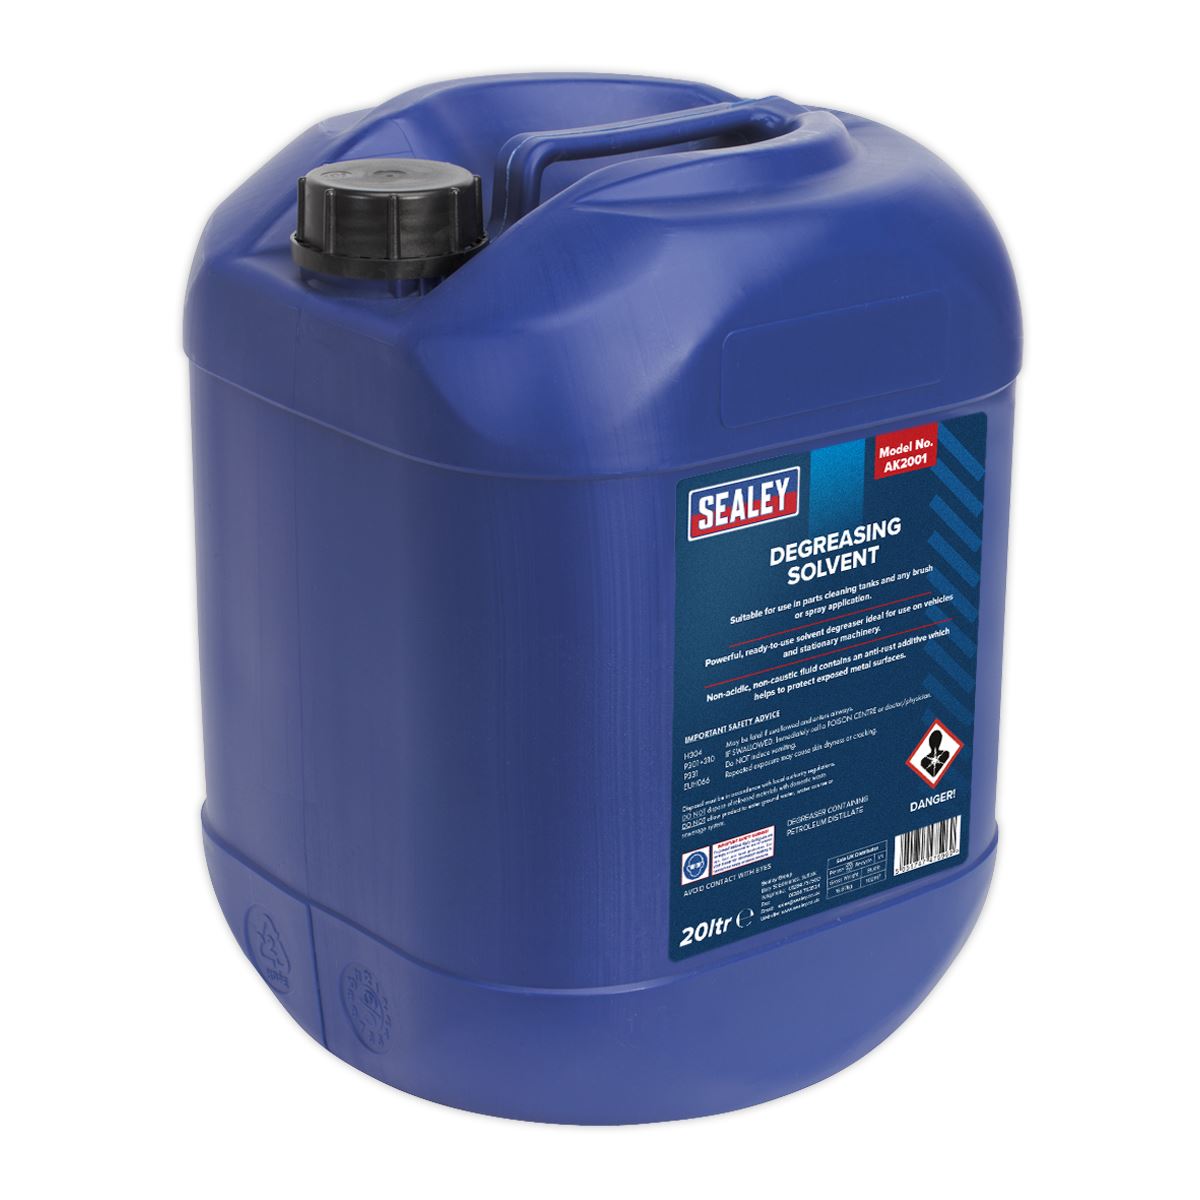 Sealey Degreasing Solvent 20L